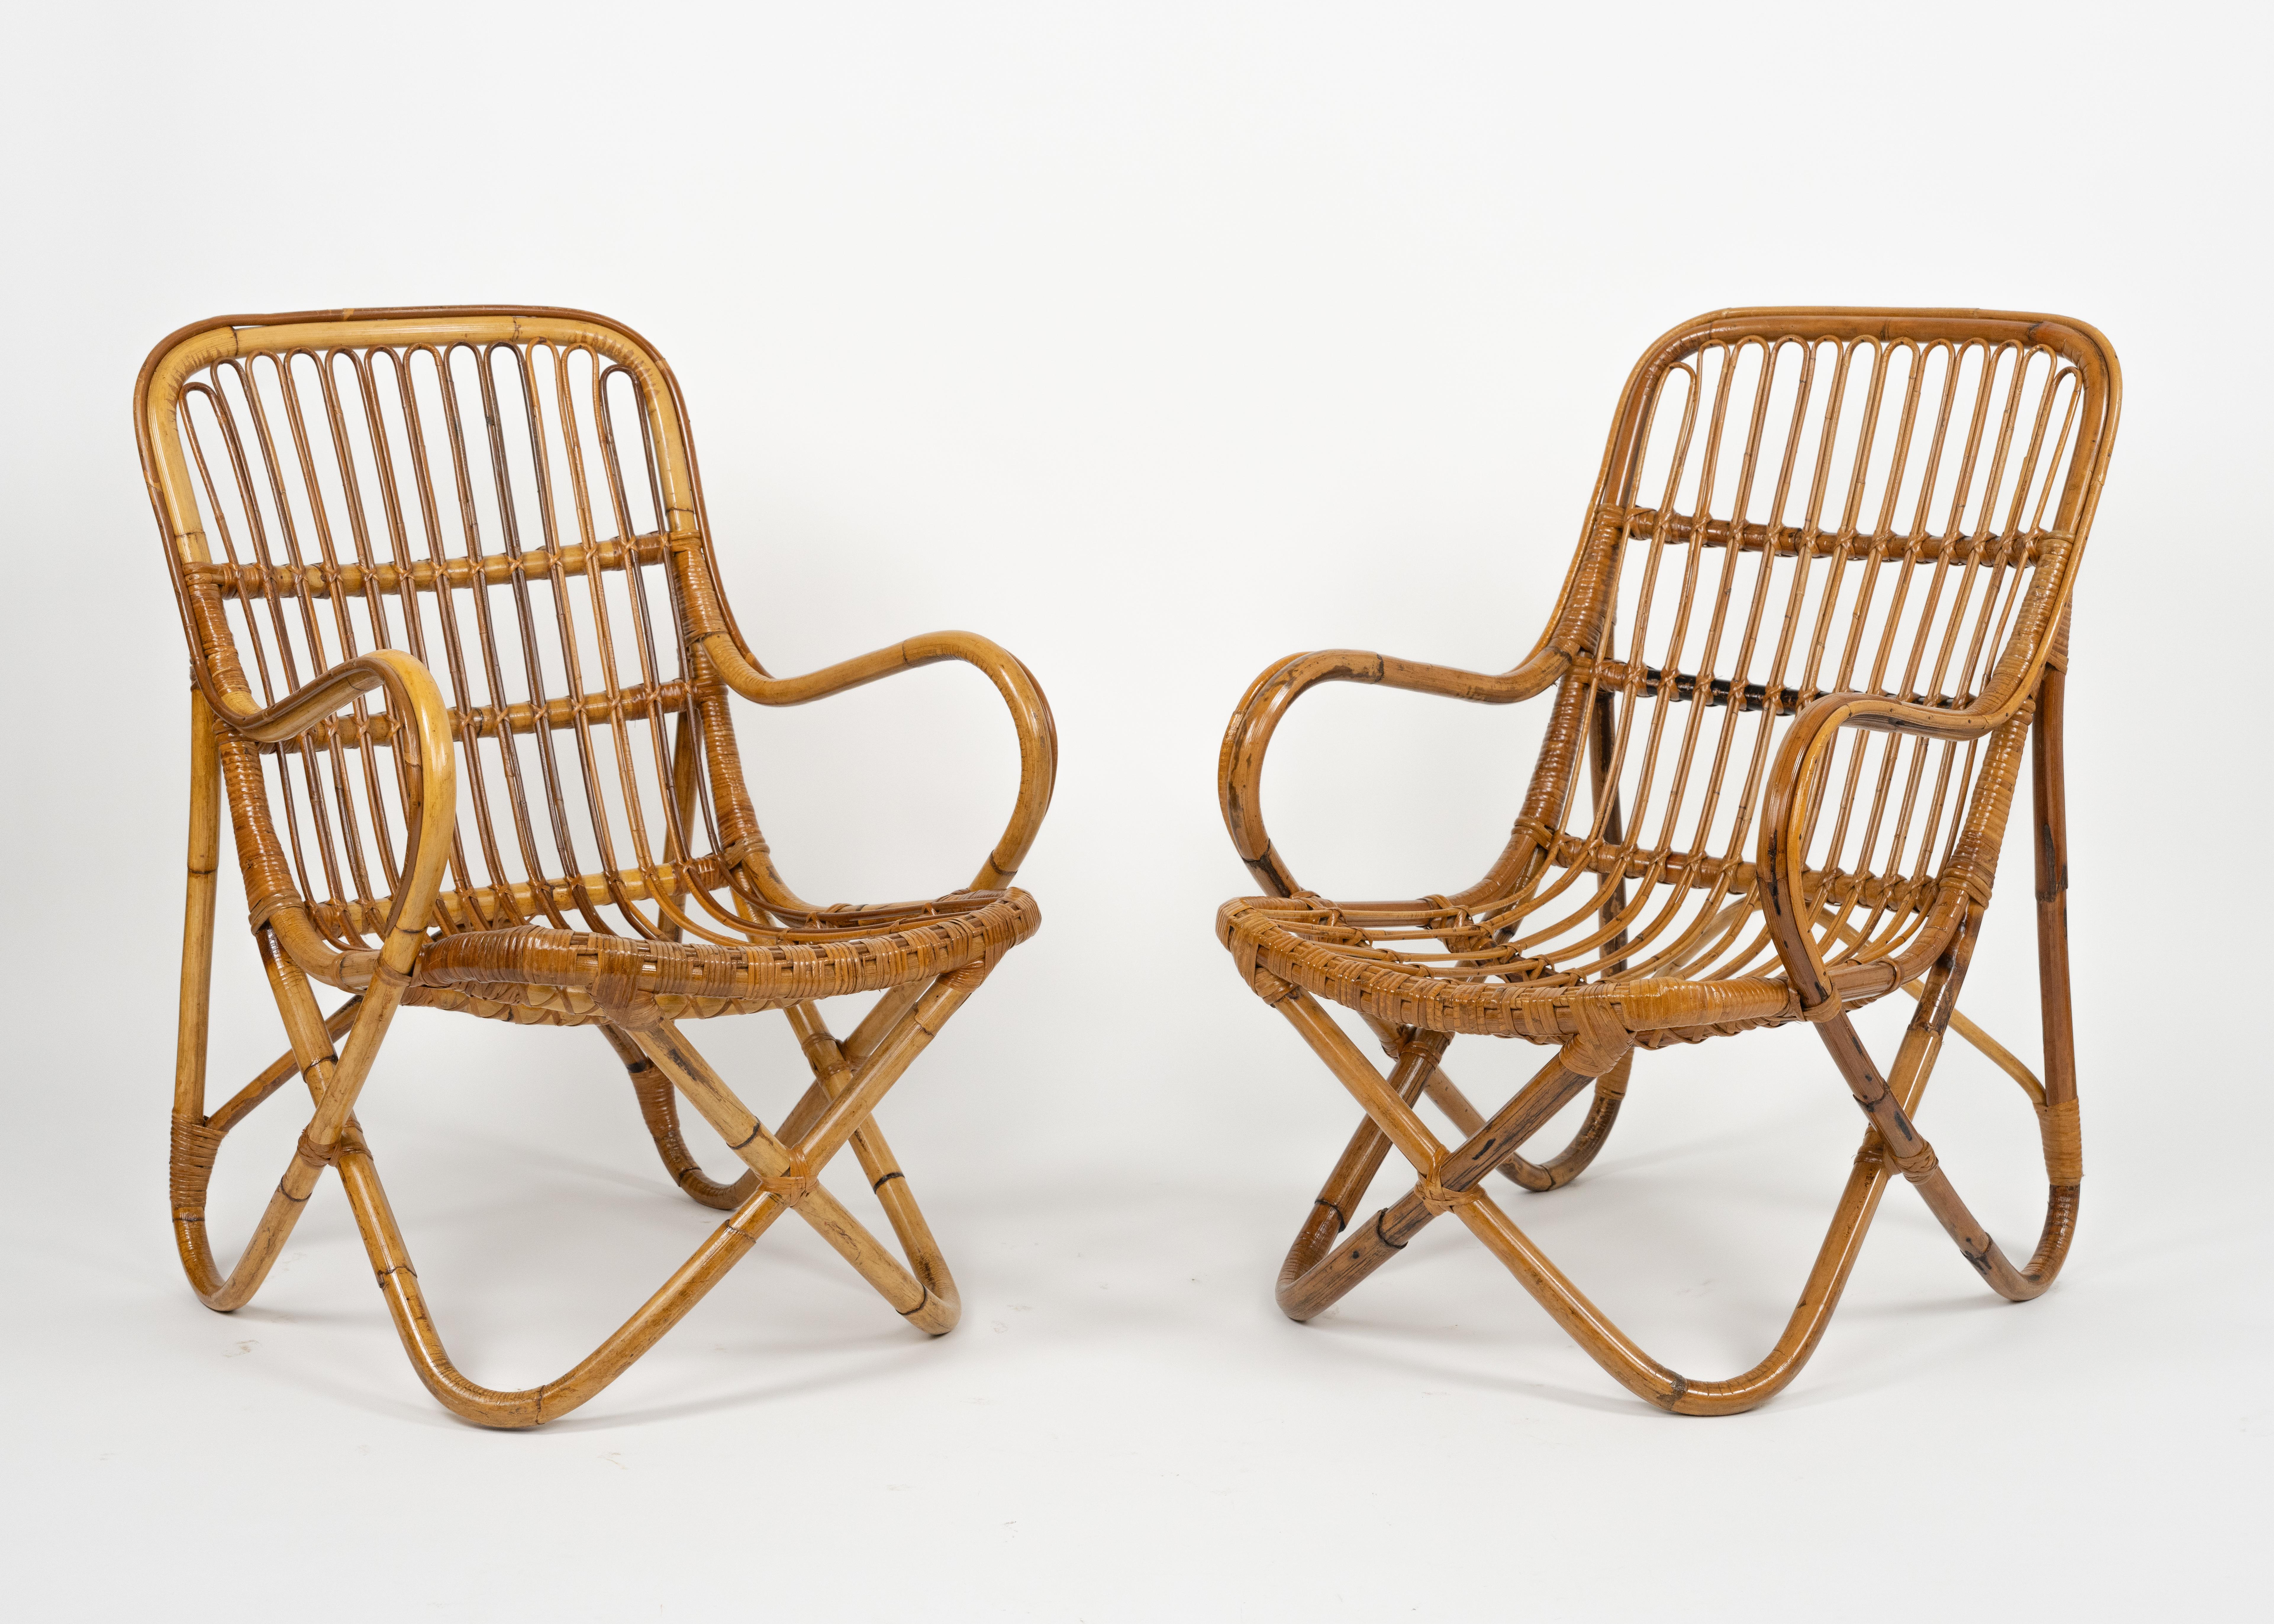 Midcentury Bamboo and Rattan Pair of Armchairs Tito Agnoli Style, Italy 1960s For Sale 3